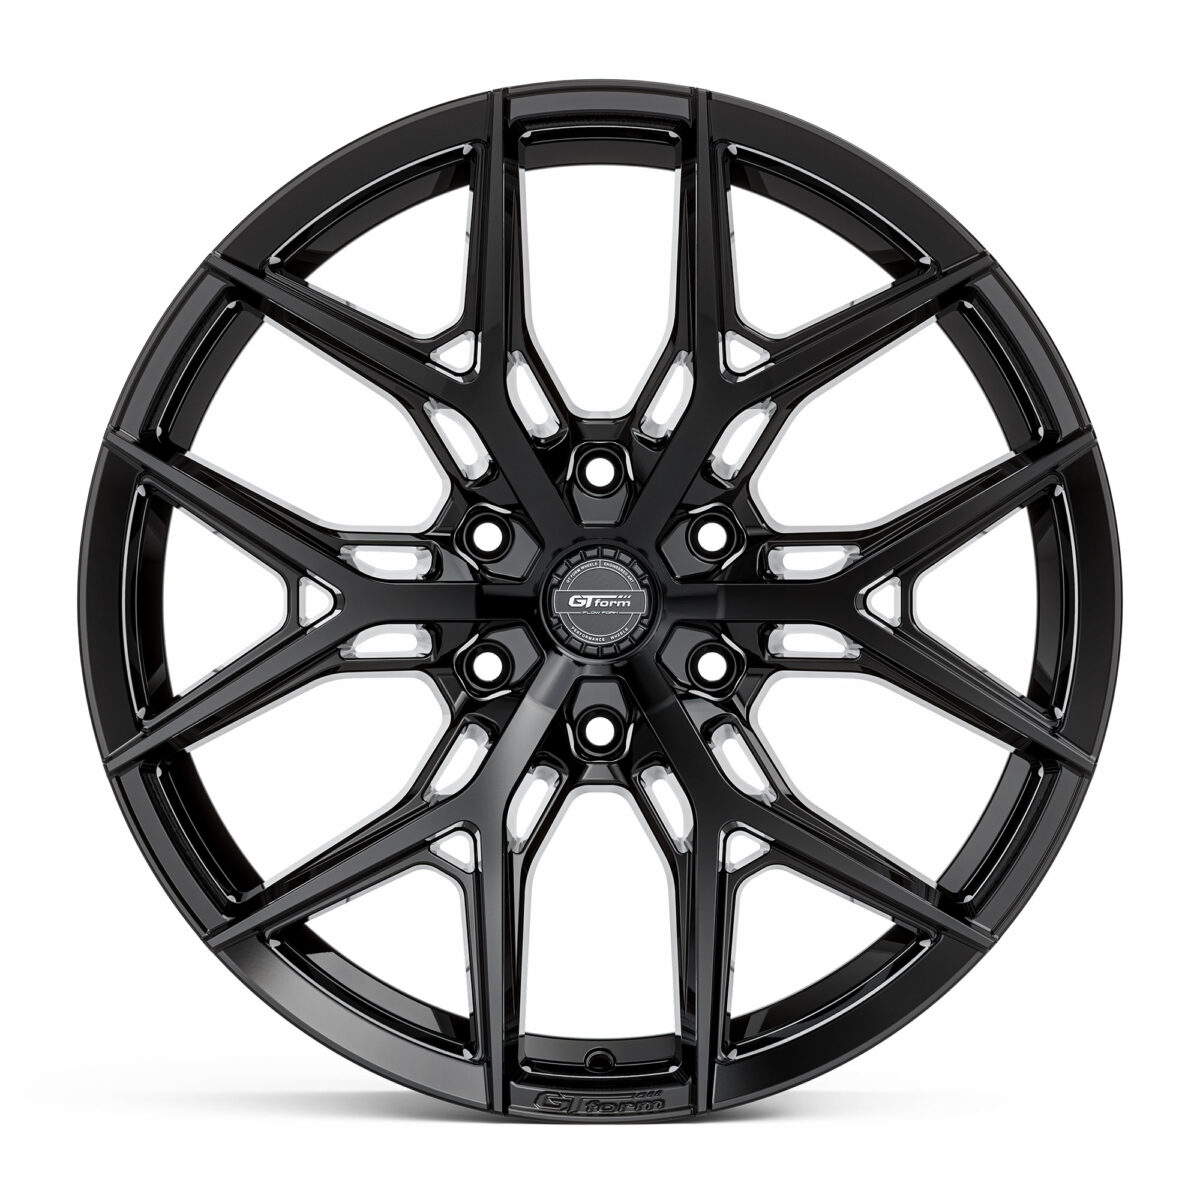 4X4 WHEELS GT FORM GFS1 GLOSS BLACK 18 20 22 INCH OFFROAD RIMS FOR 4WD SUV